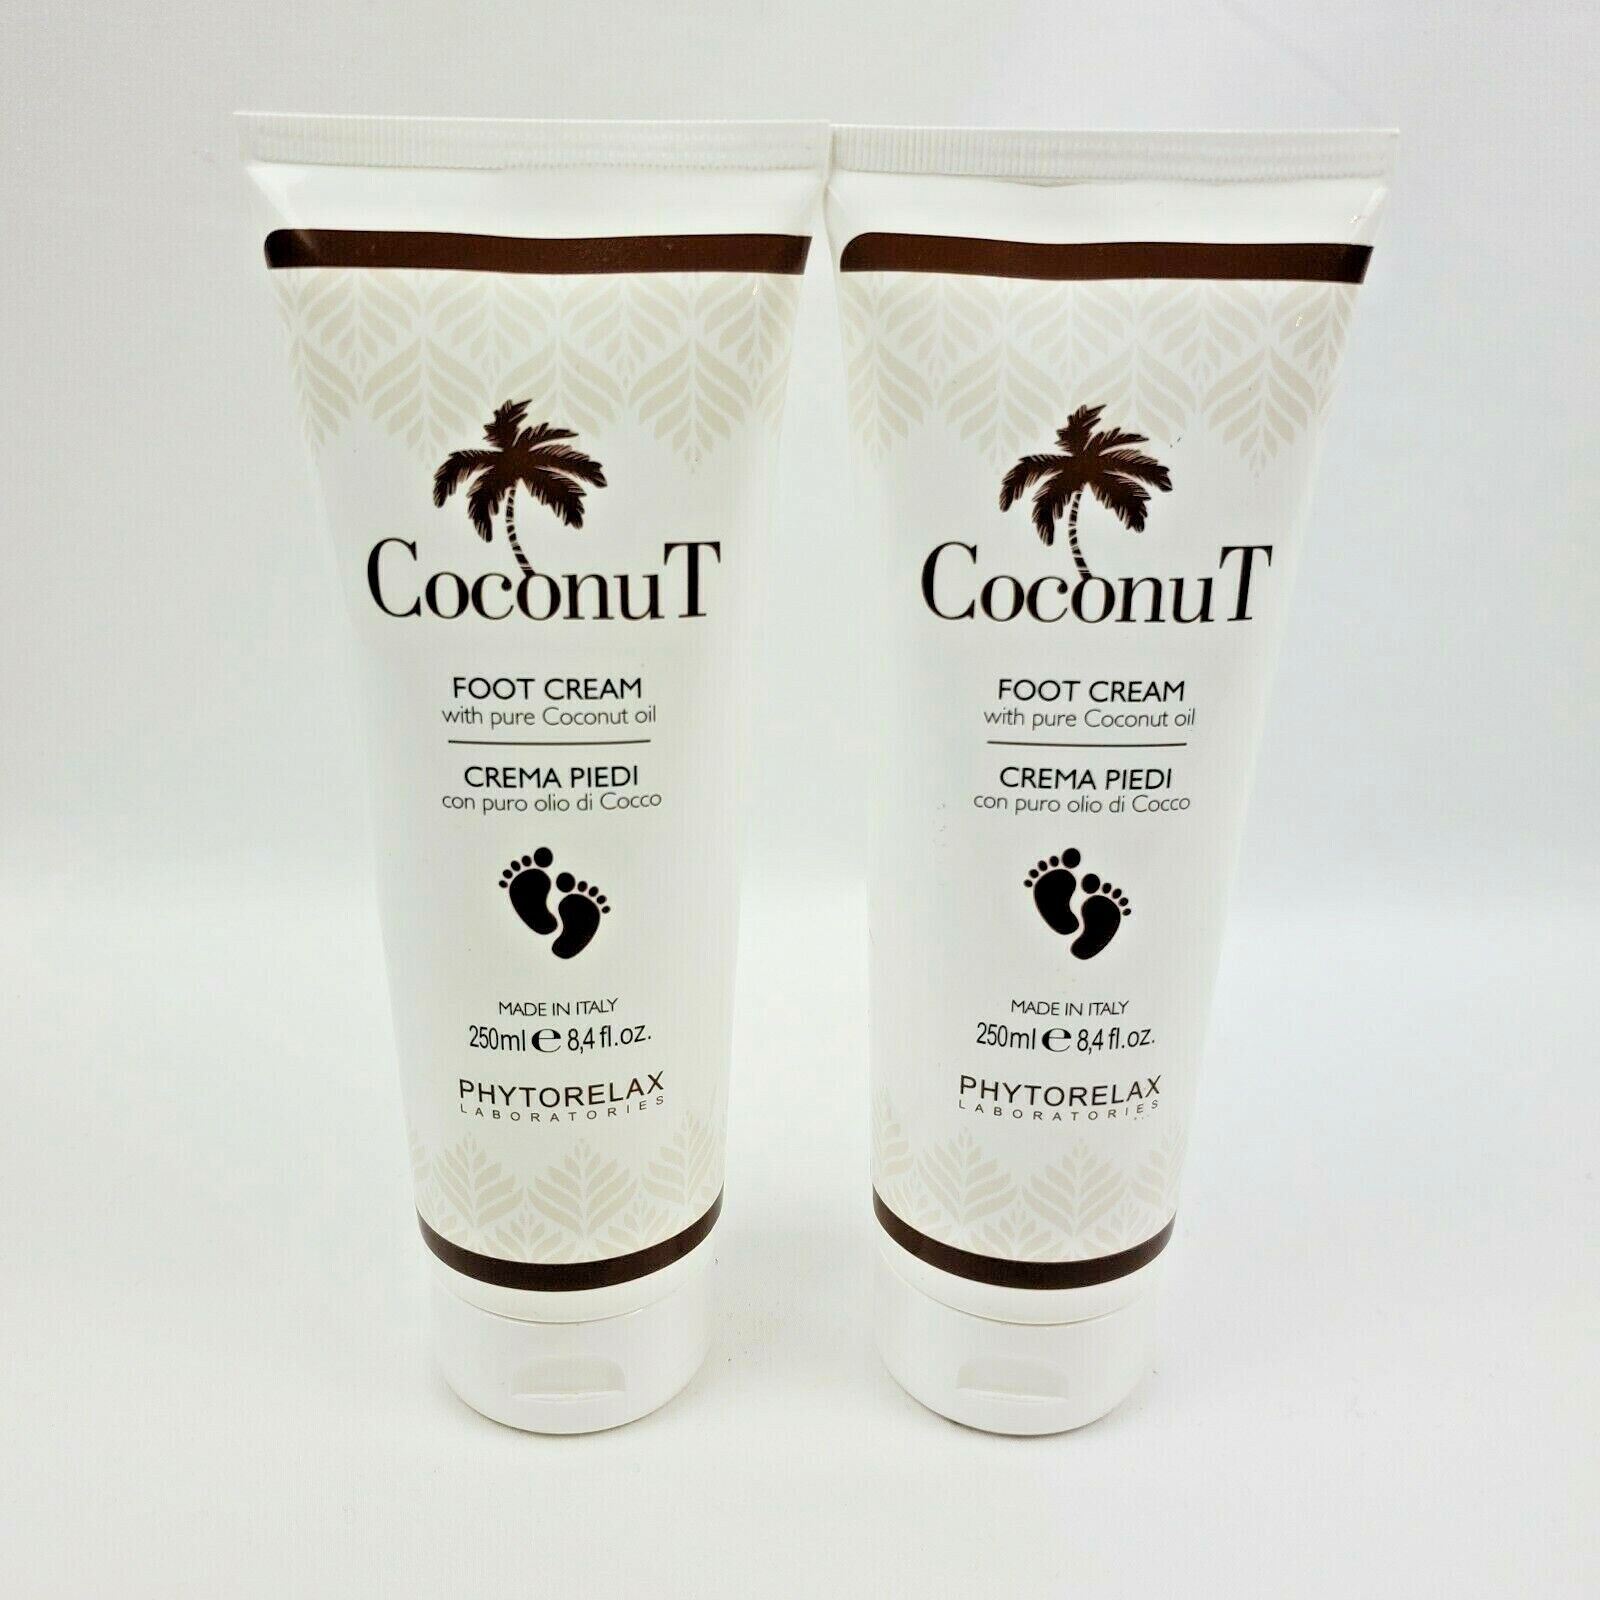 2X Phytorelax Labs by Harbor Coconut Foot Cream with pure Coconut Oil 8.4oz each phytorelax Does not apply